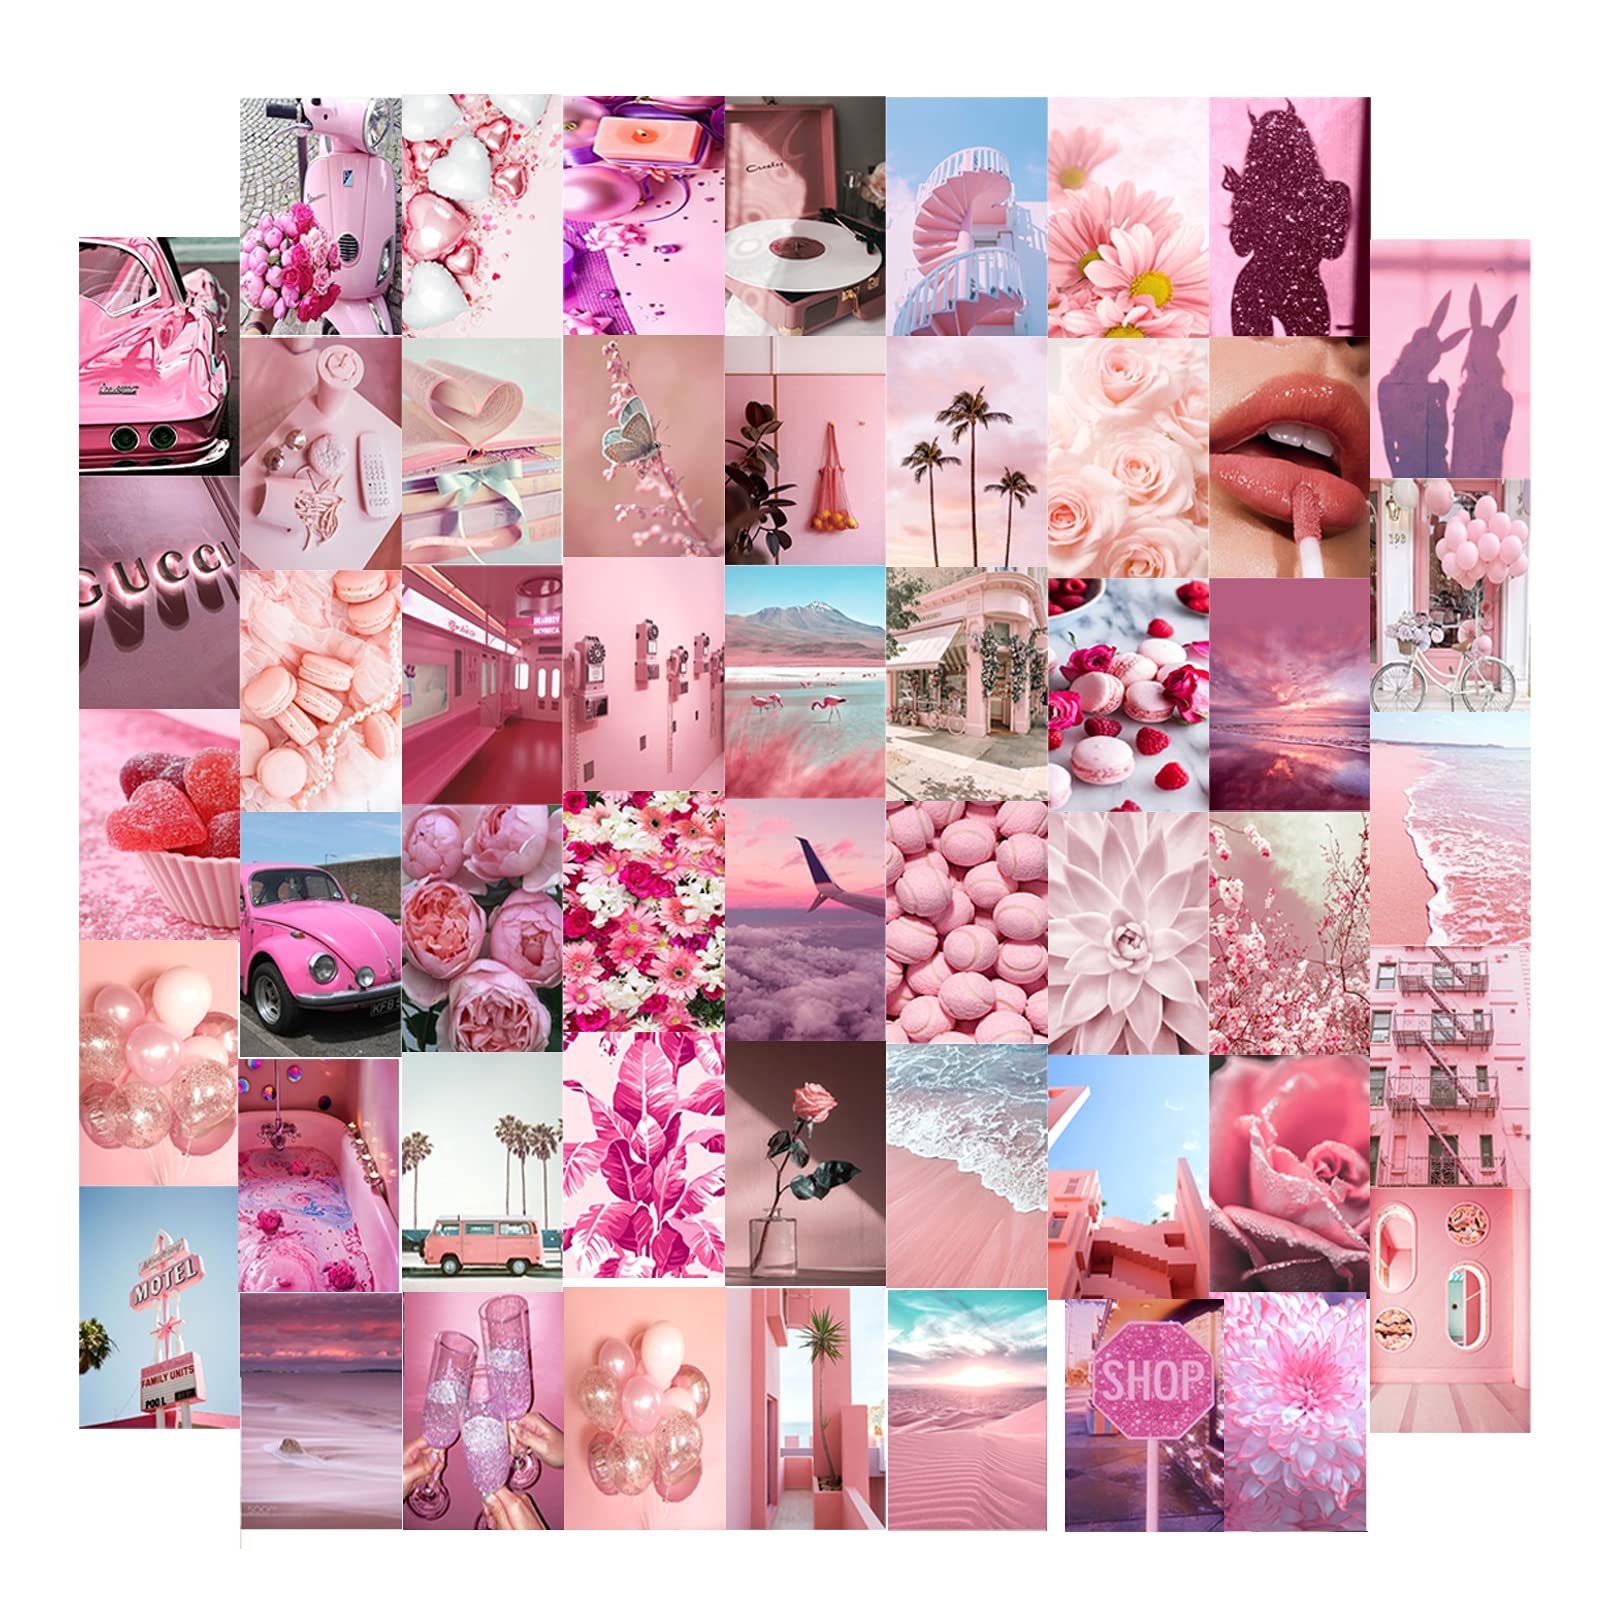 Rivco Pink Wall Collage Kit, Aesthetic Picture Bedroom Decor for Teen Girls, Light Pink Color Dorm Photo Display for Cute Room Decor, Wall Décor (52 PCS 4*6 inch ): Posters & Prints